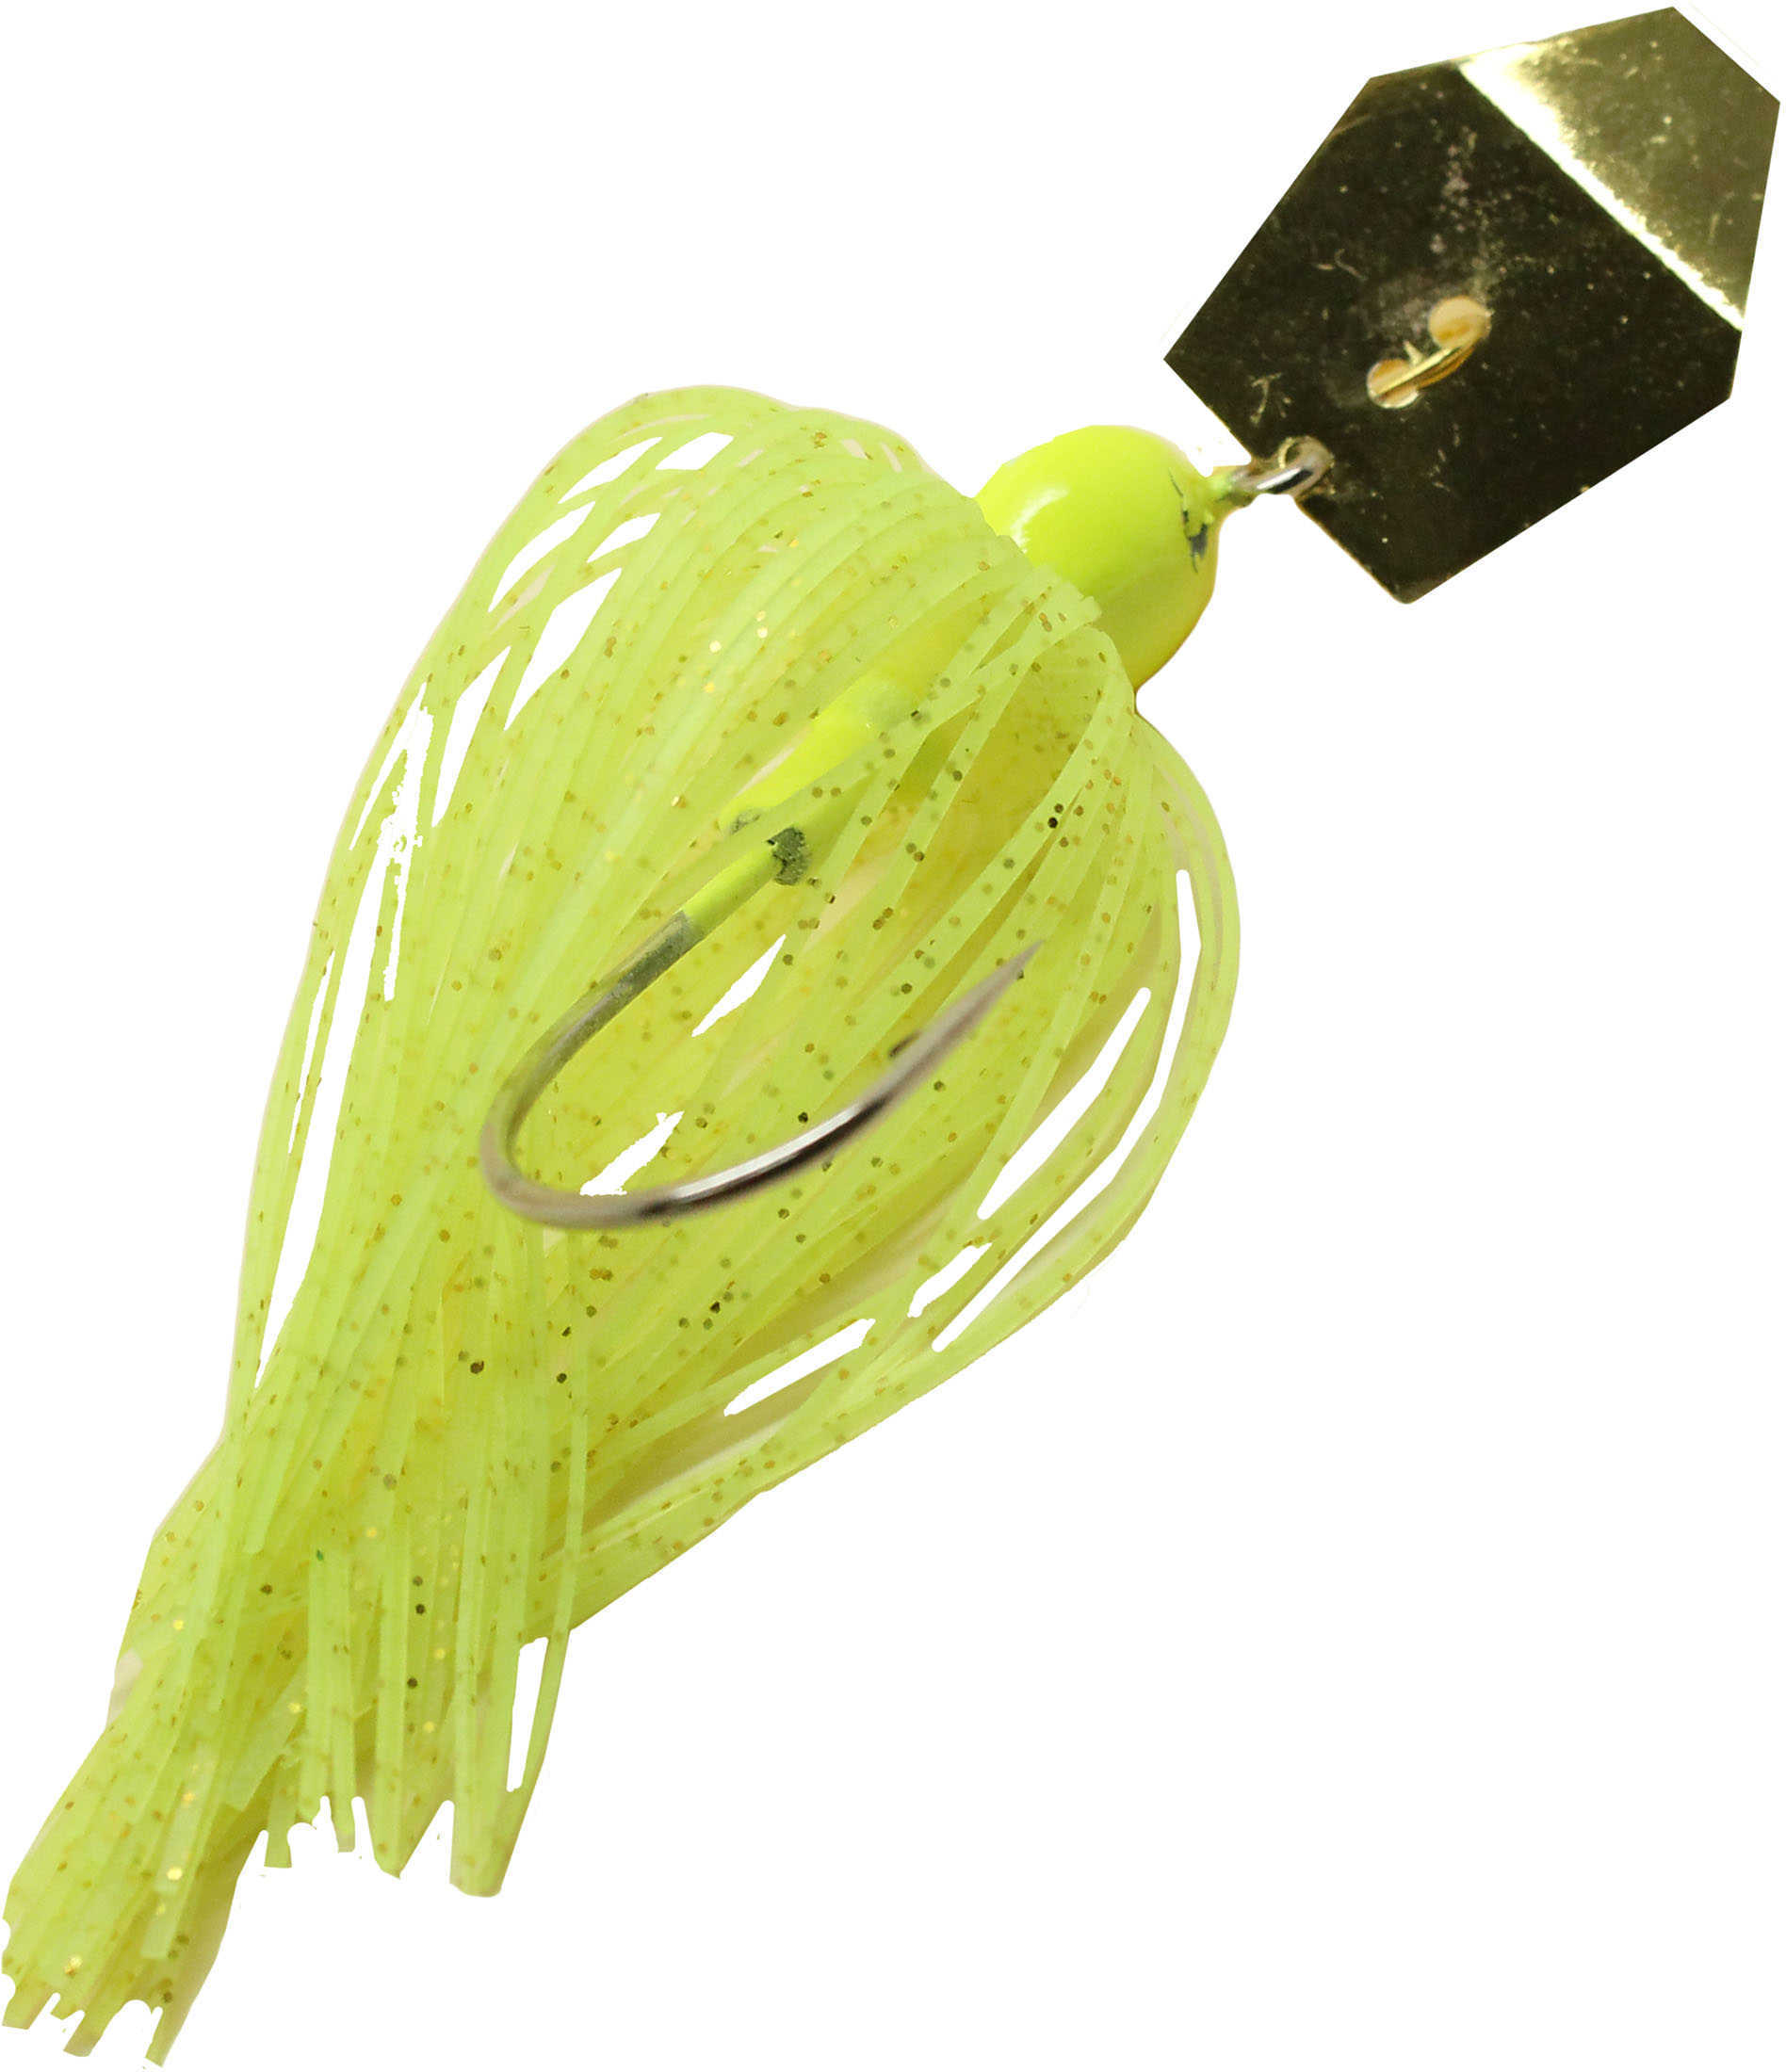 Z-Man Fishing Products Chatter Bait 1/2 Ounce 5/0 Hook Size Chartreuse Lure, Md: CB12-17